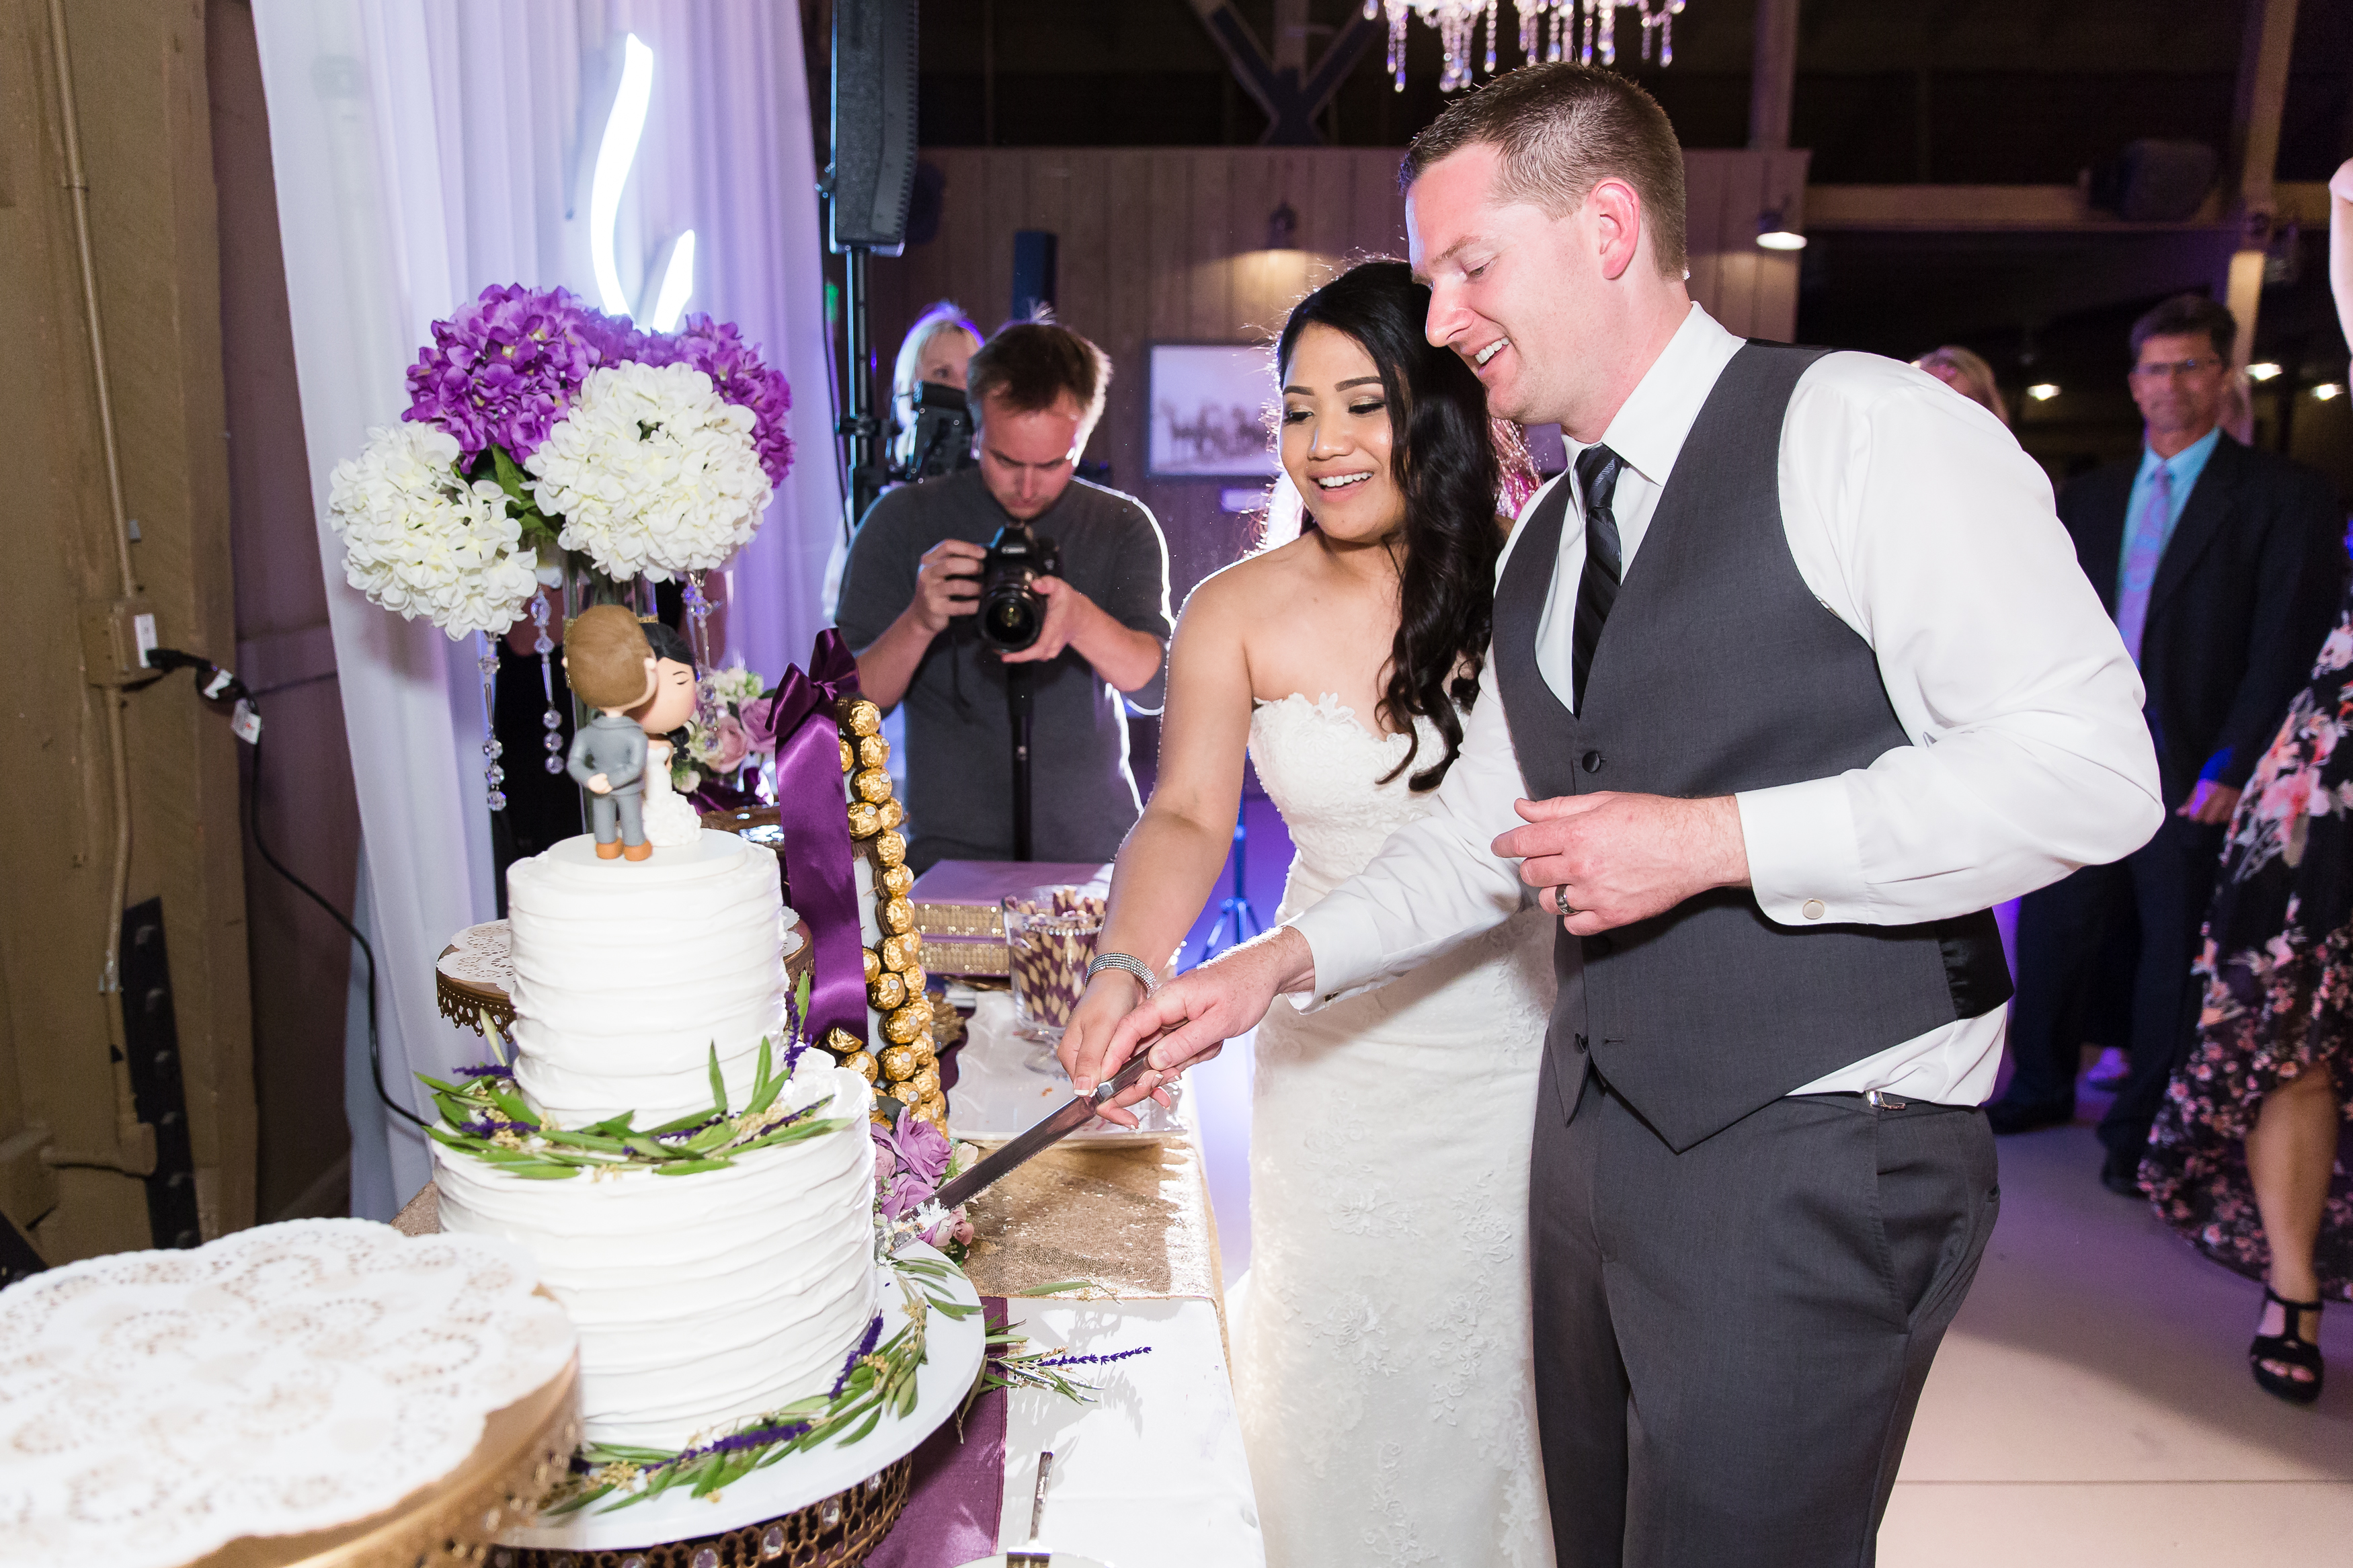 Bride and groom cut wedding cake during reception at Camarillo Ranch House